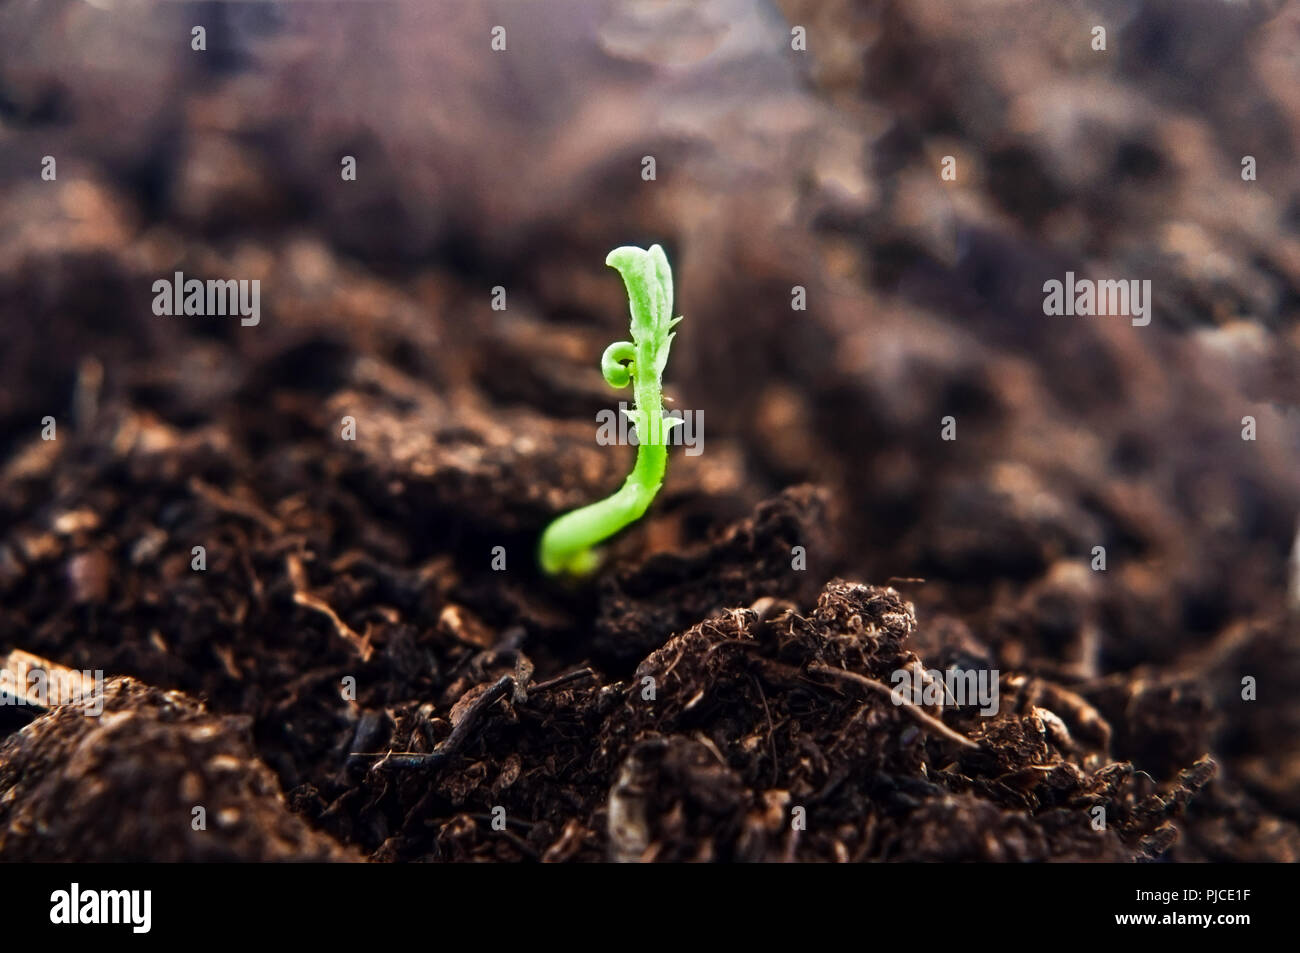 A small green plant shoot, growing upwards from dark brown soil, reaching towards light. New beginning concept. Stock Photo